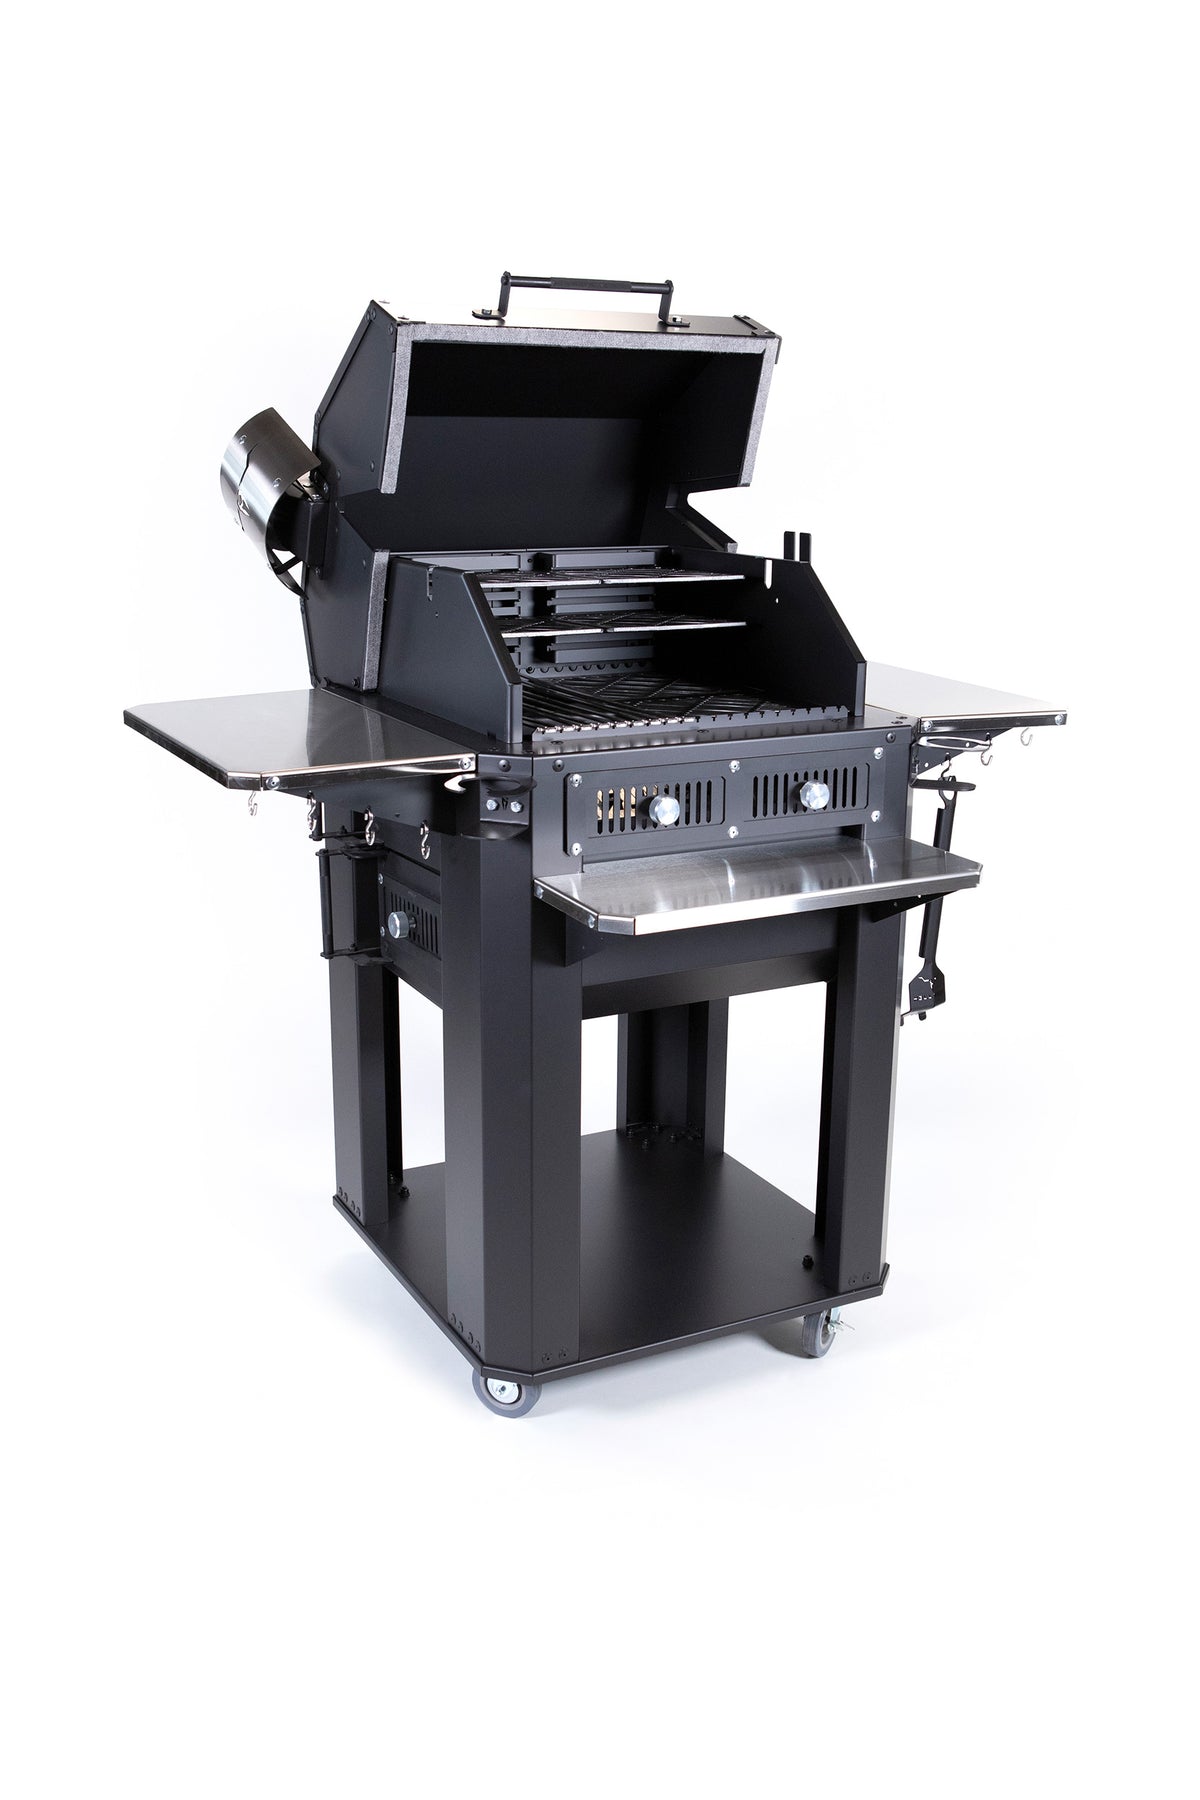 Hellrazr™ Fortress™ Charcoal Grill & Smoker